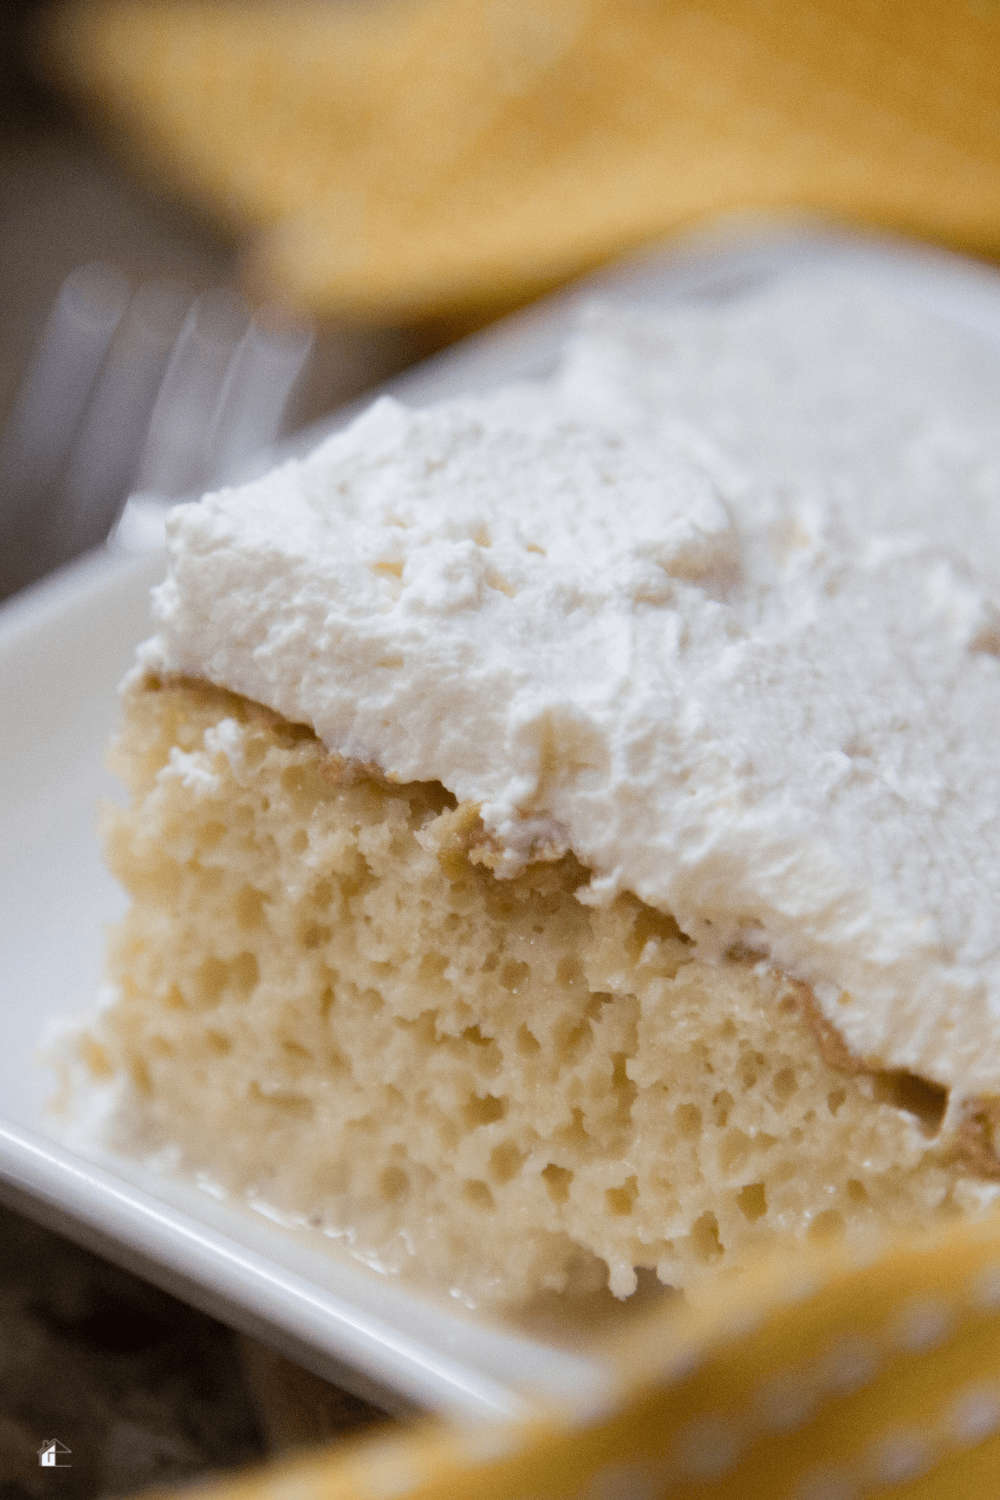 Try this Tres Leche Cake recipe using Media Crema, and you are going to never want to try another Tres Leche Cake recipe again! via @mystayathome